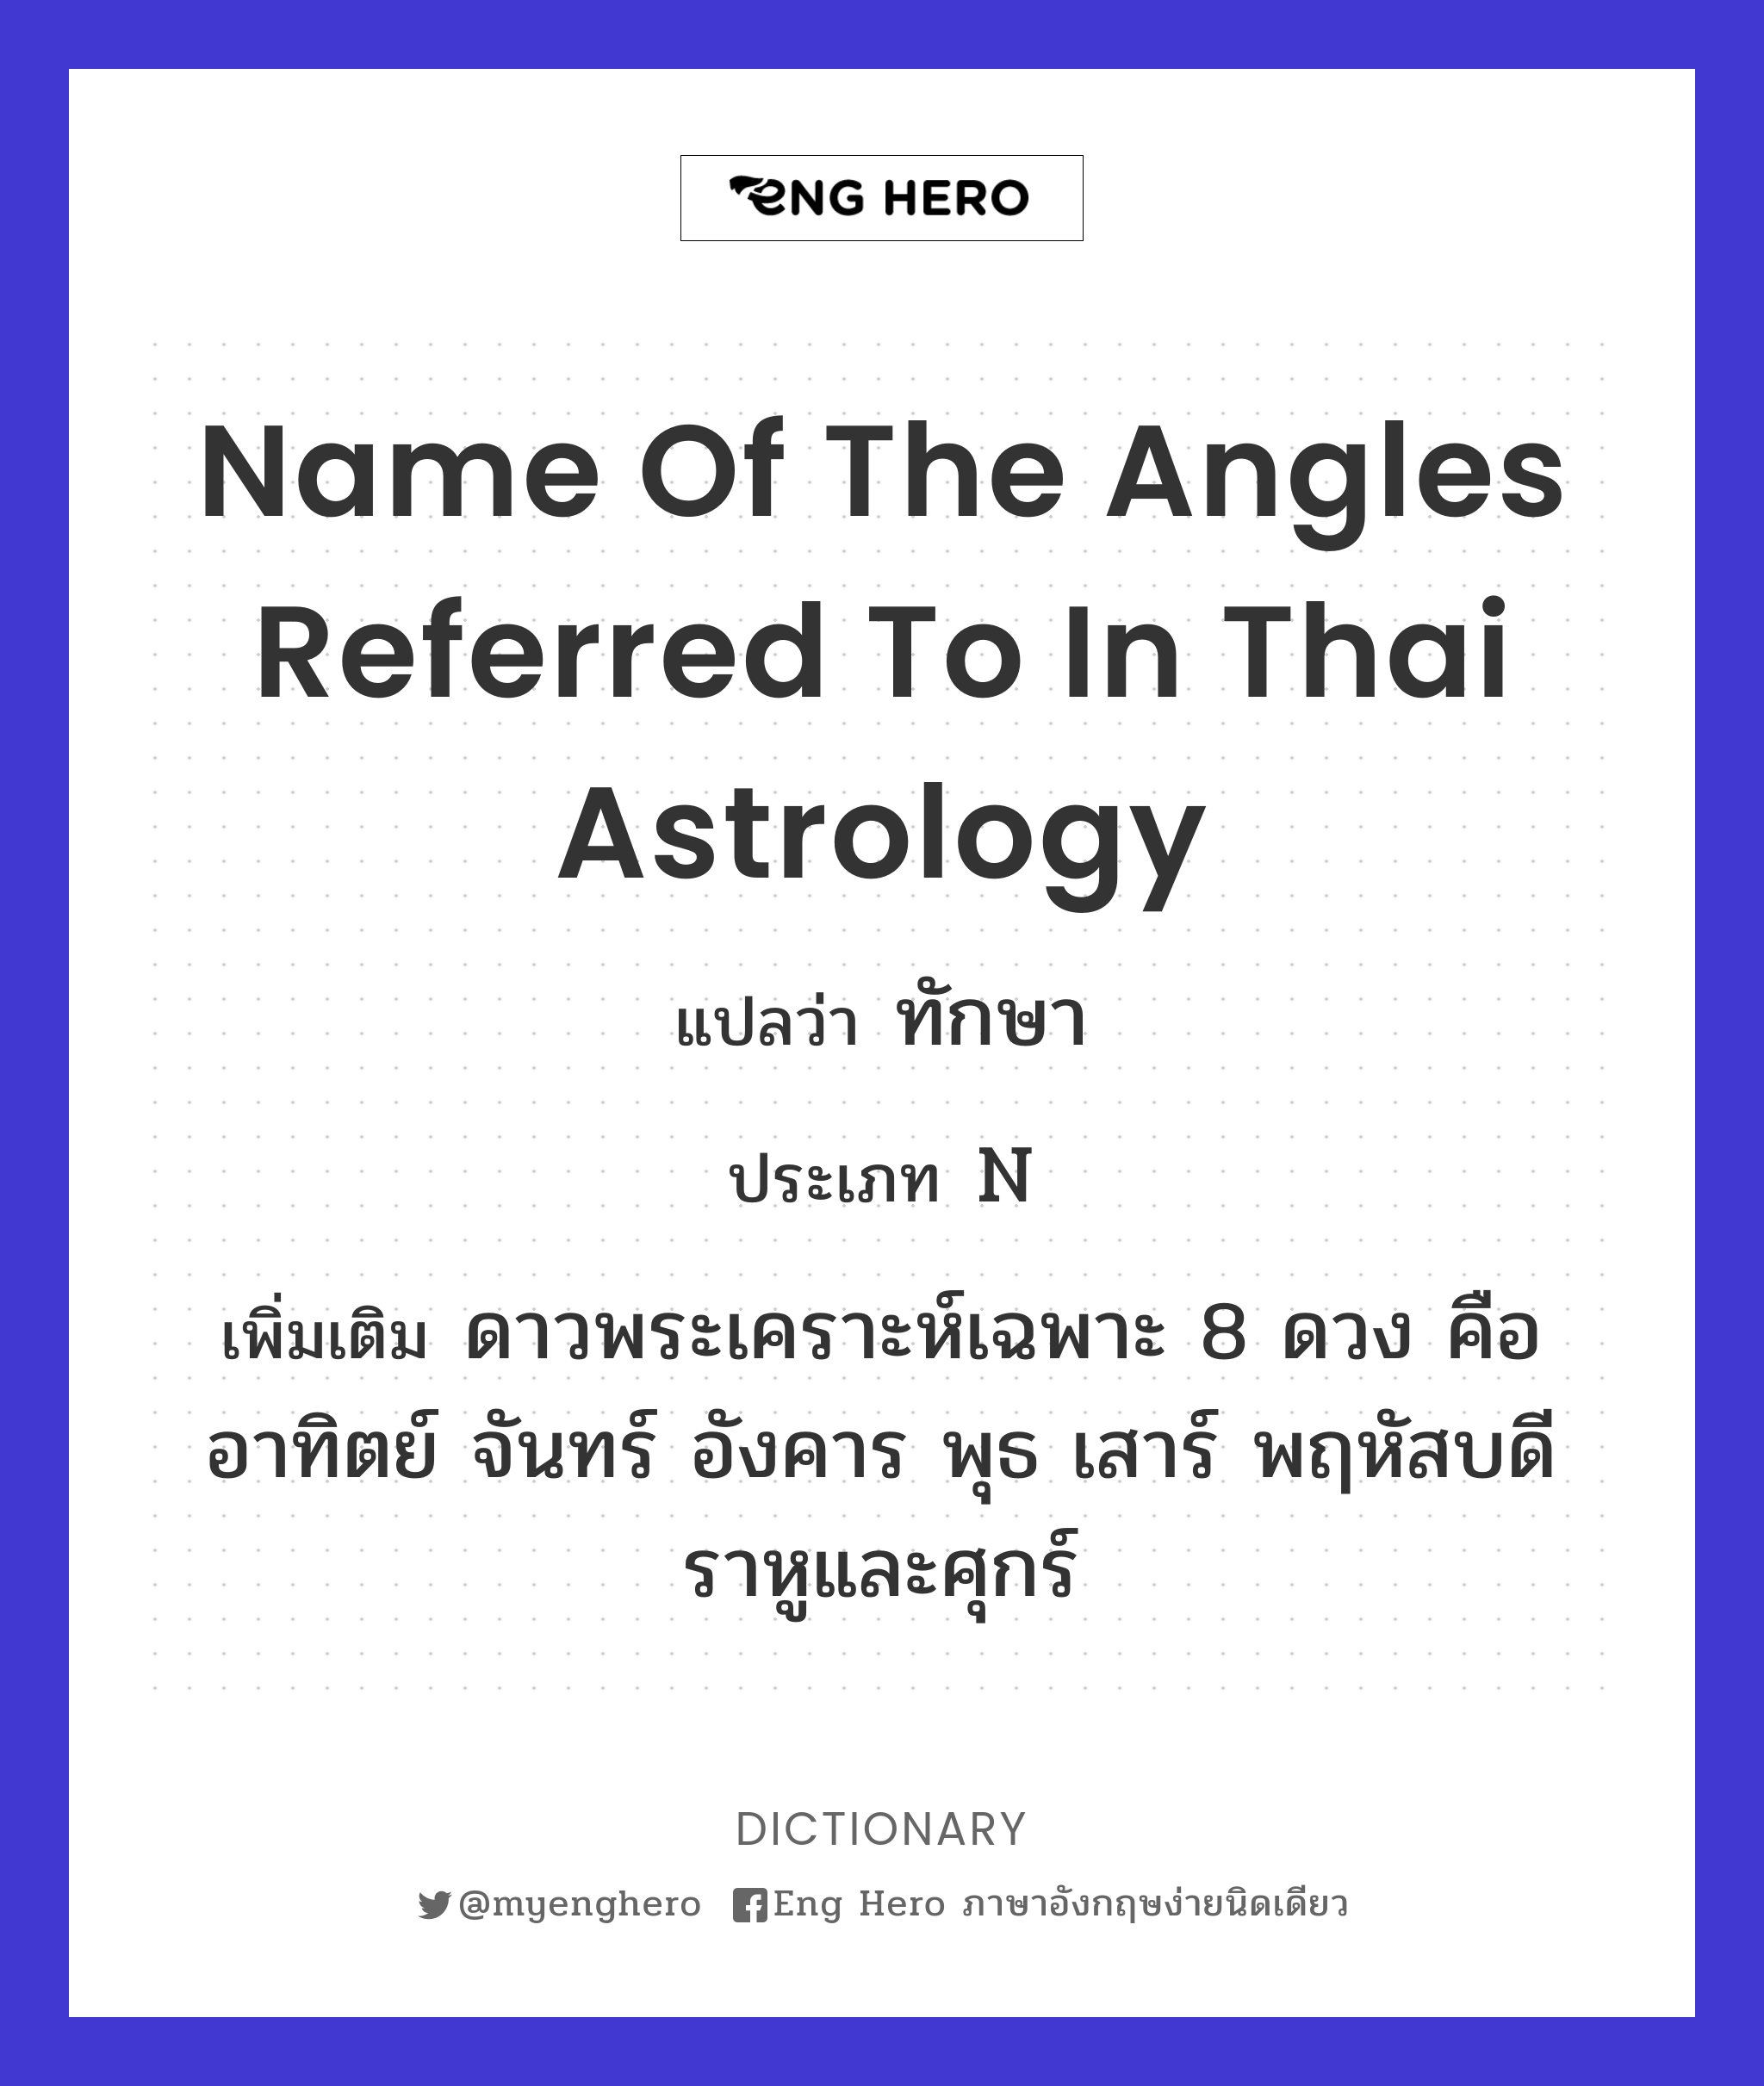 name of the angles referred to in Thai astrology